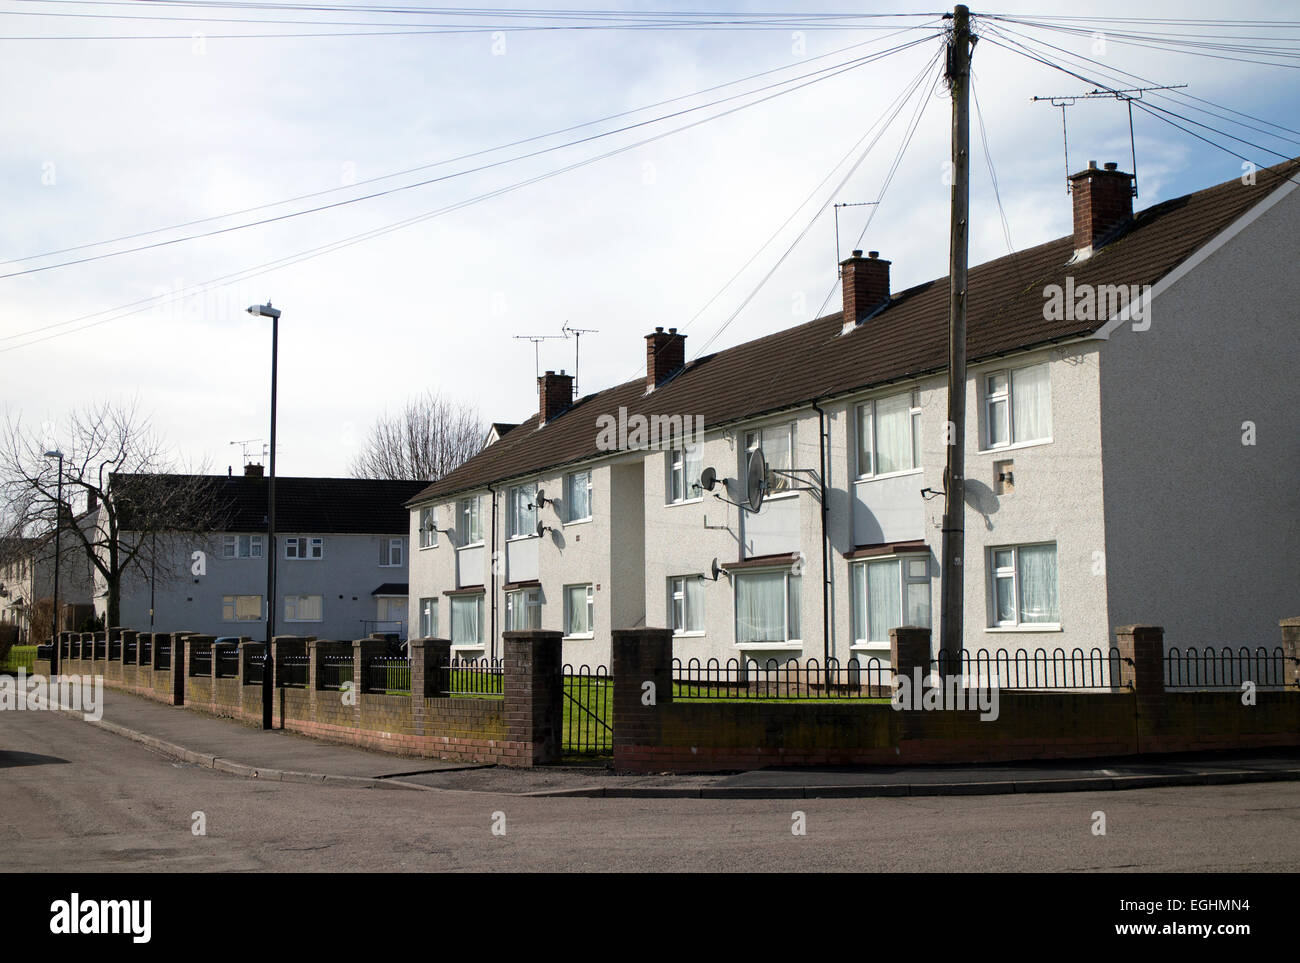 Housing in Willenhall, Coventry, West Midlands, England, UK Stock Photo